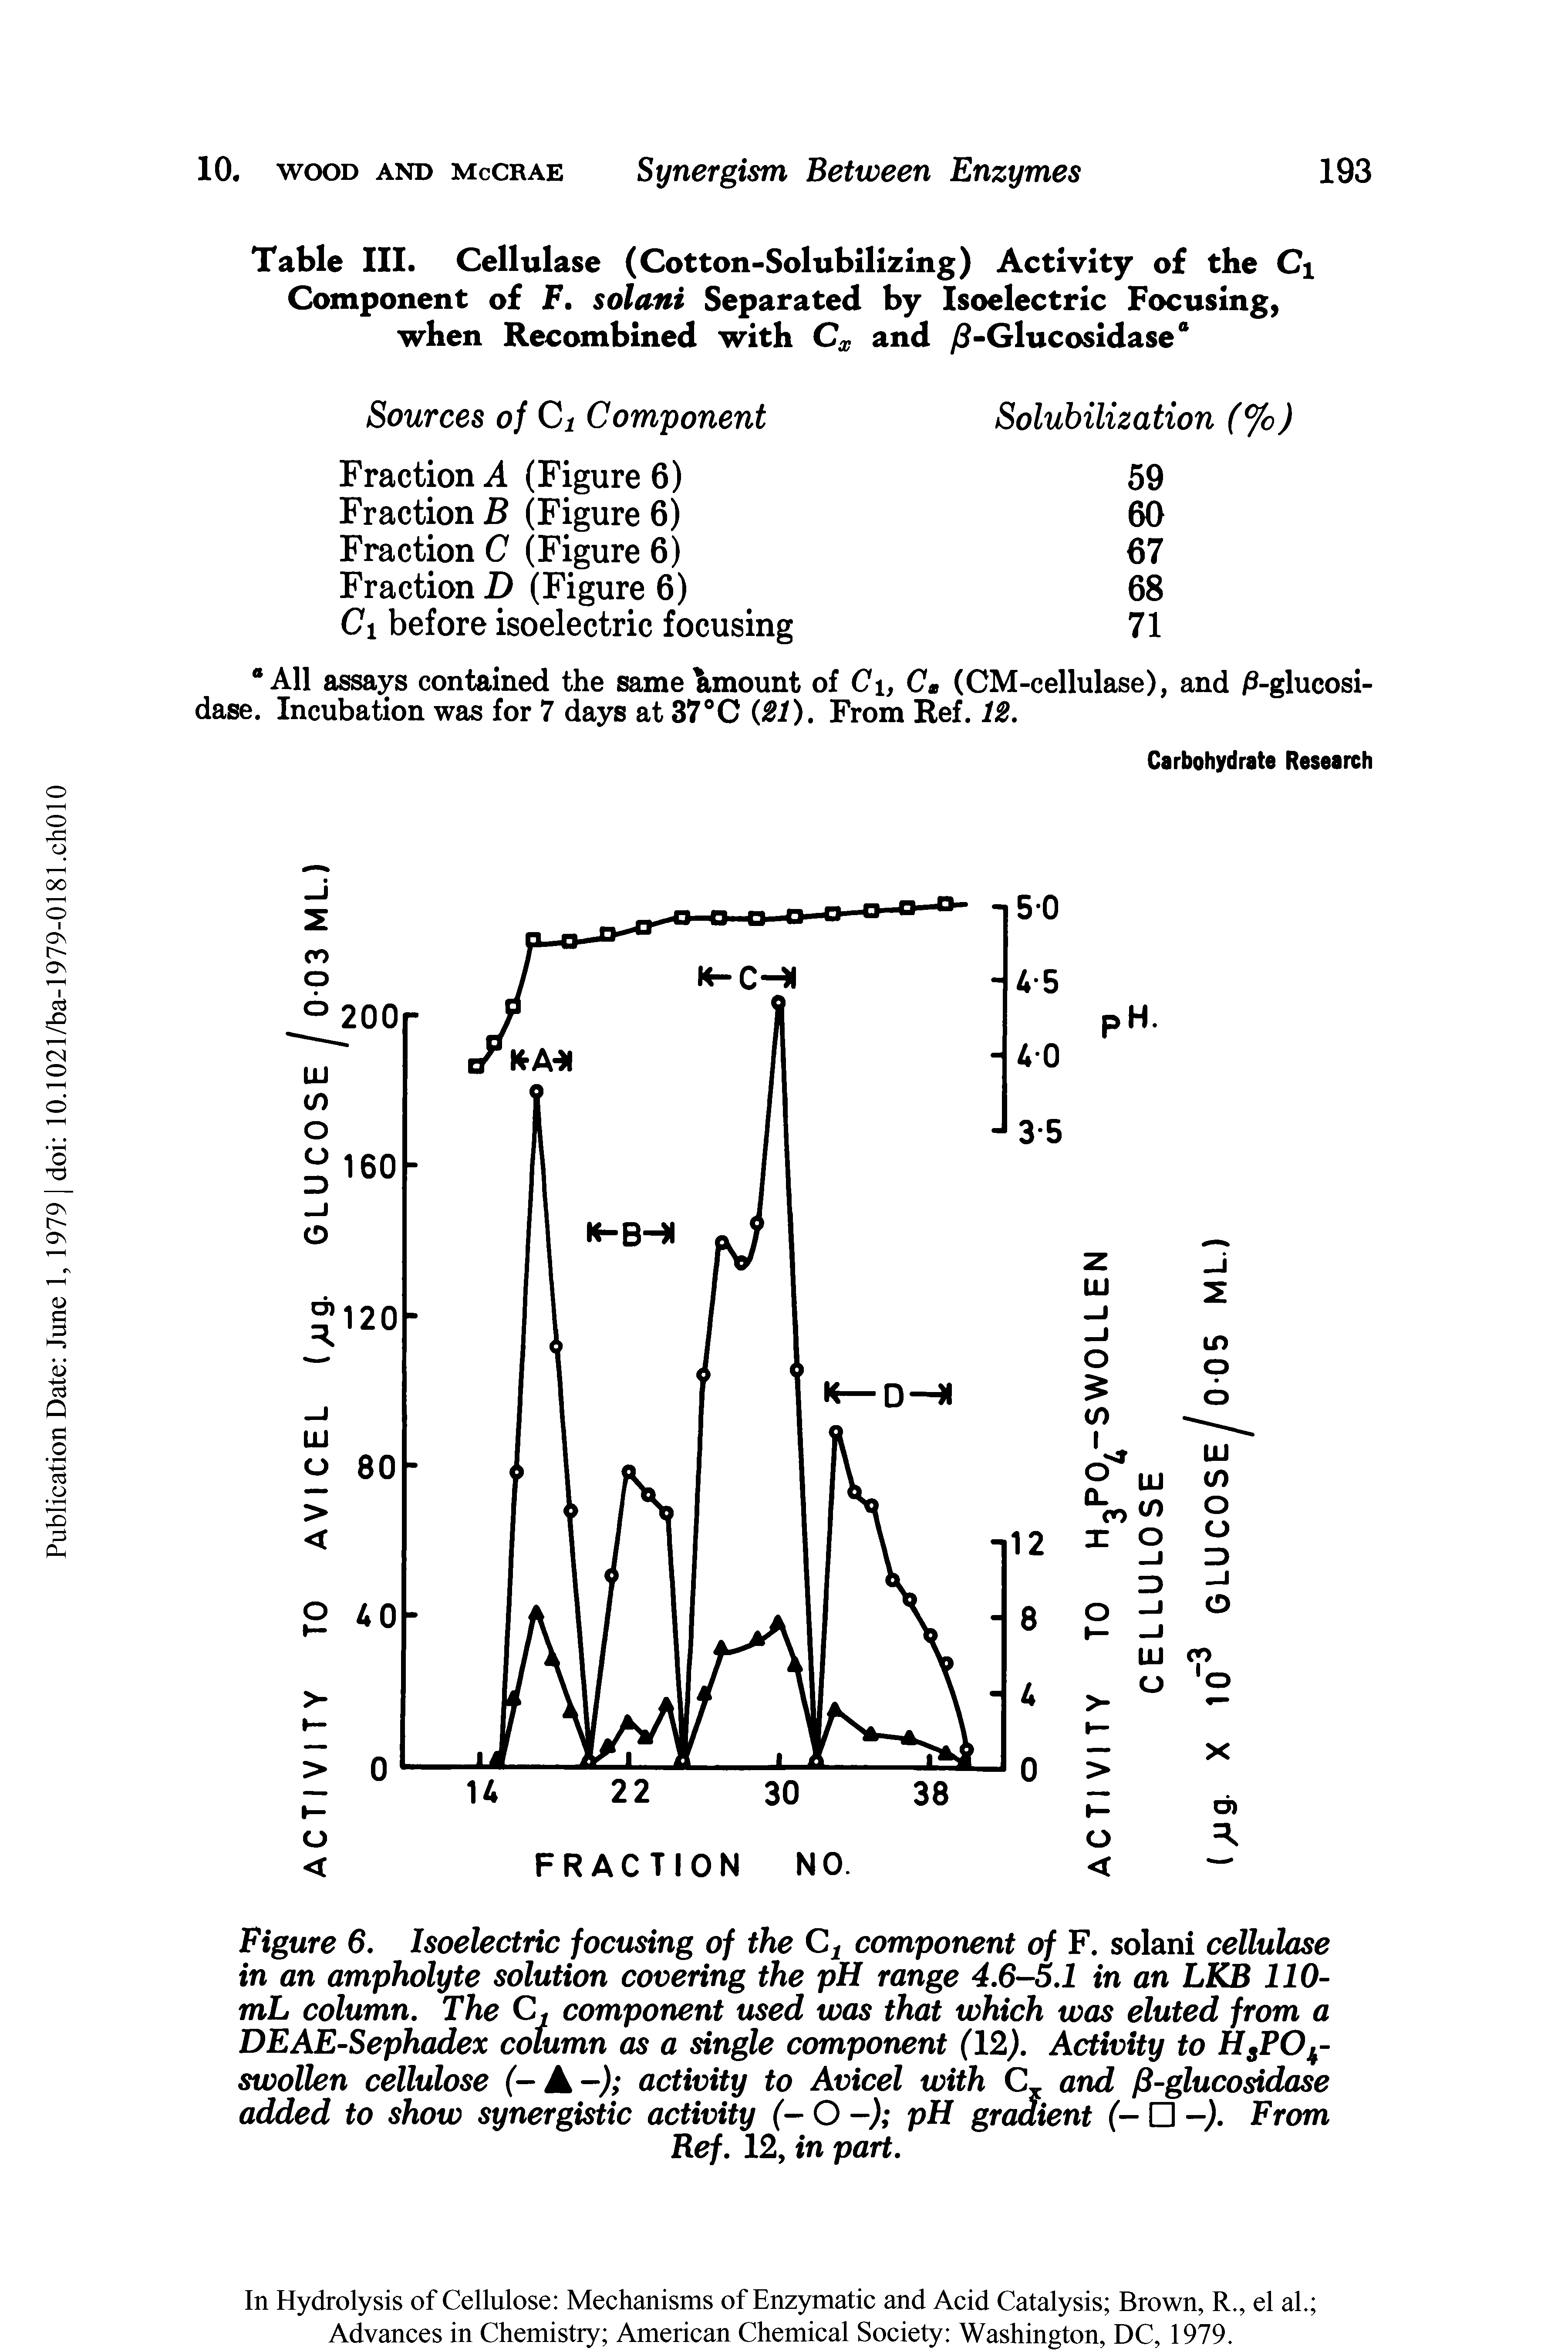 Figure 6. Isoelectric focusing of the Ci component of F. solani cellulase in an ampholyte solution covering the pH range 4.6-5.1 in an LKB 110-mL column. The C. component used was that which was eluted from a DEAE-Sephadex column as a single component (12). Activity to HsP04-swollen cellulose (- A activity to Avicel with CL and /3-glucosidase added to show synergistic activity (- O -) pH gradient (- -). From...